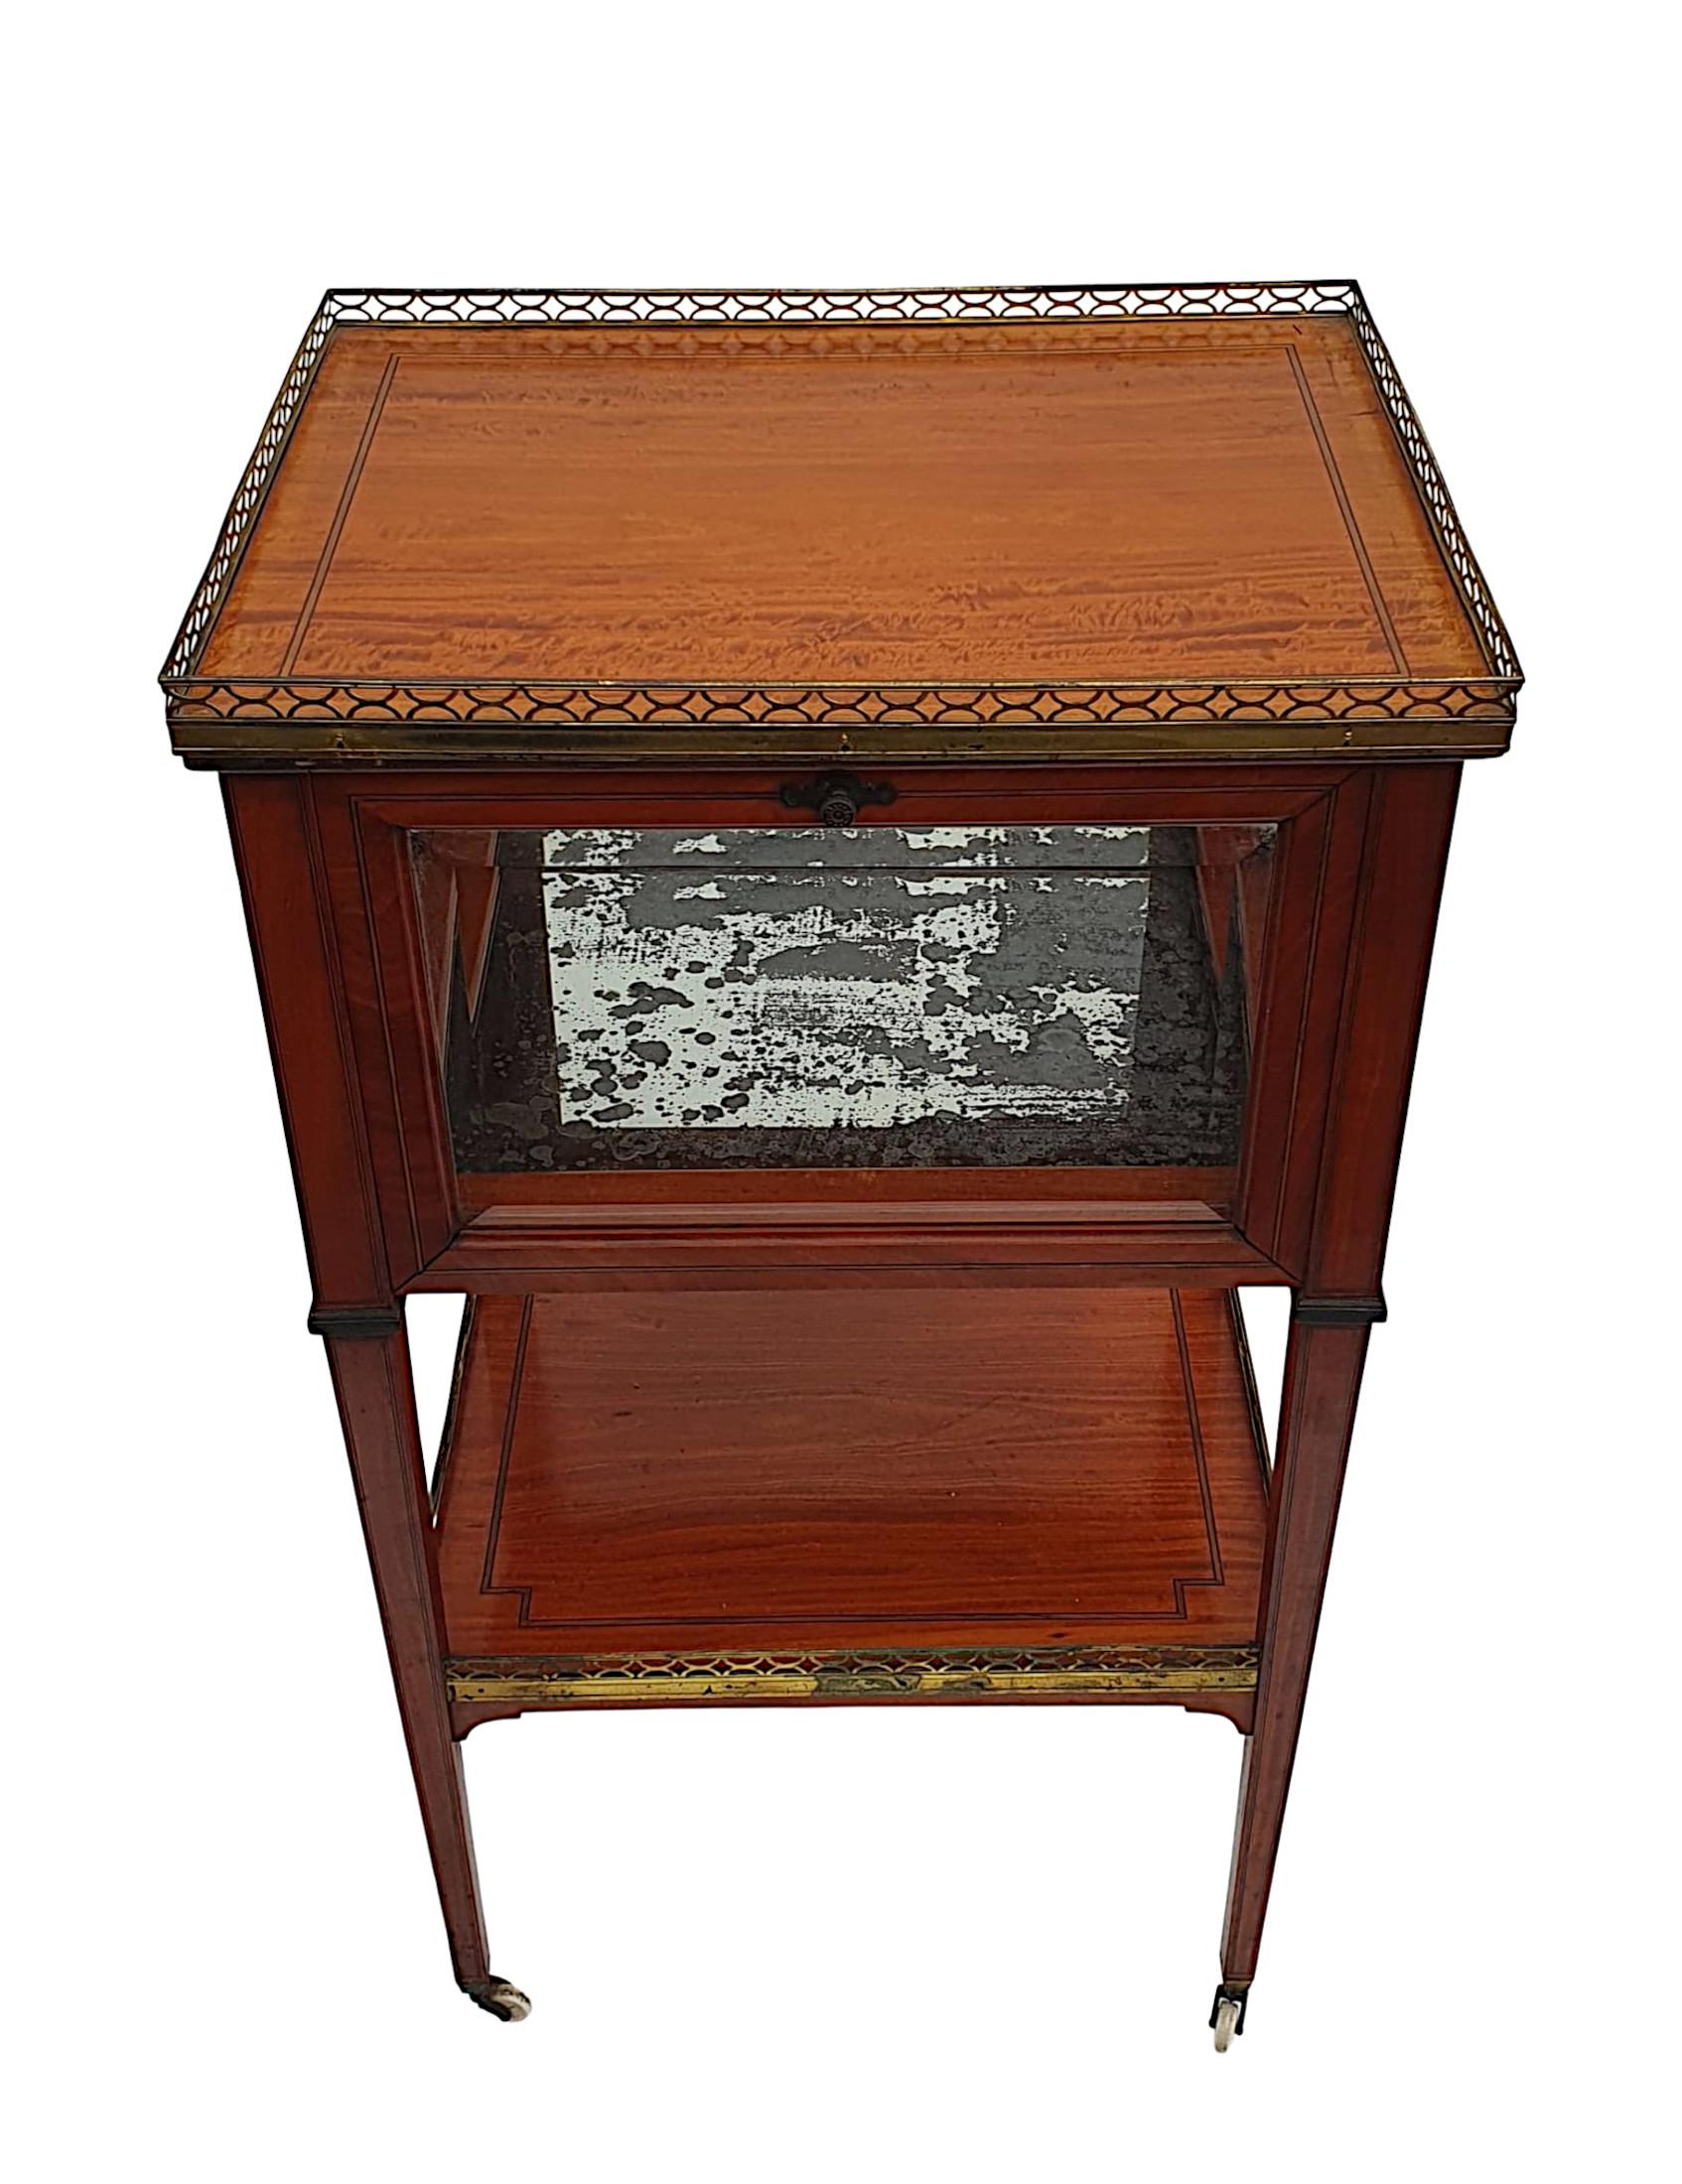 English Stunning Edwardian Inlaid Drinks Table For Sale